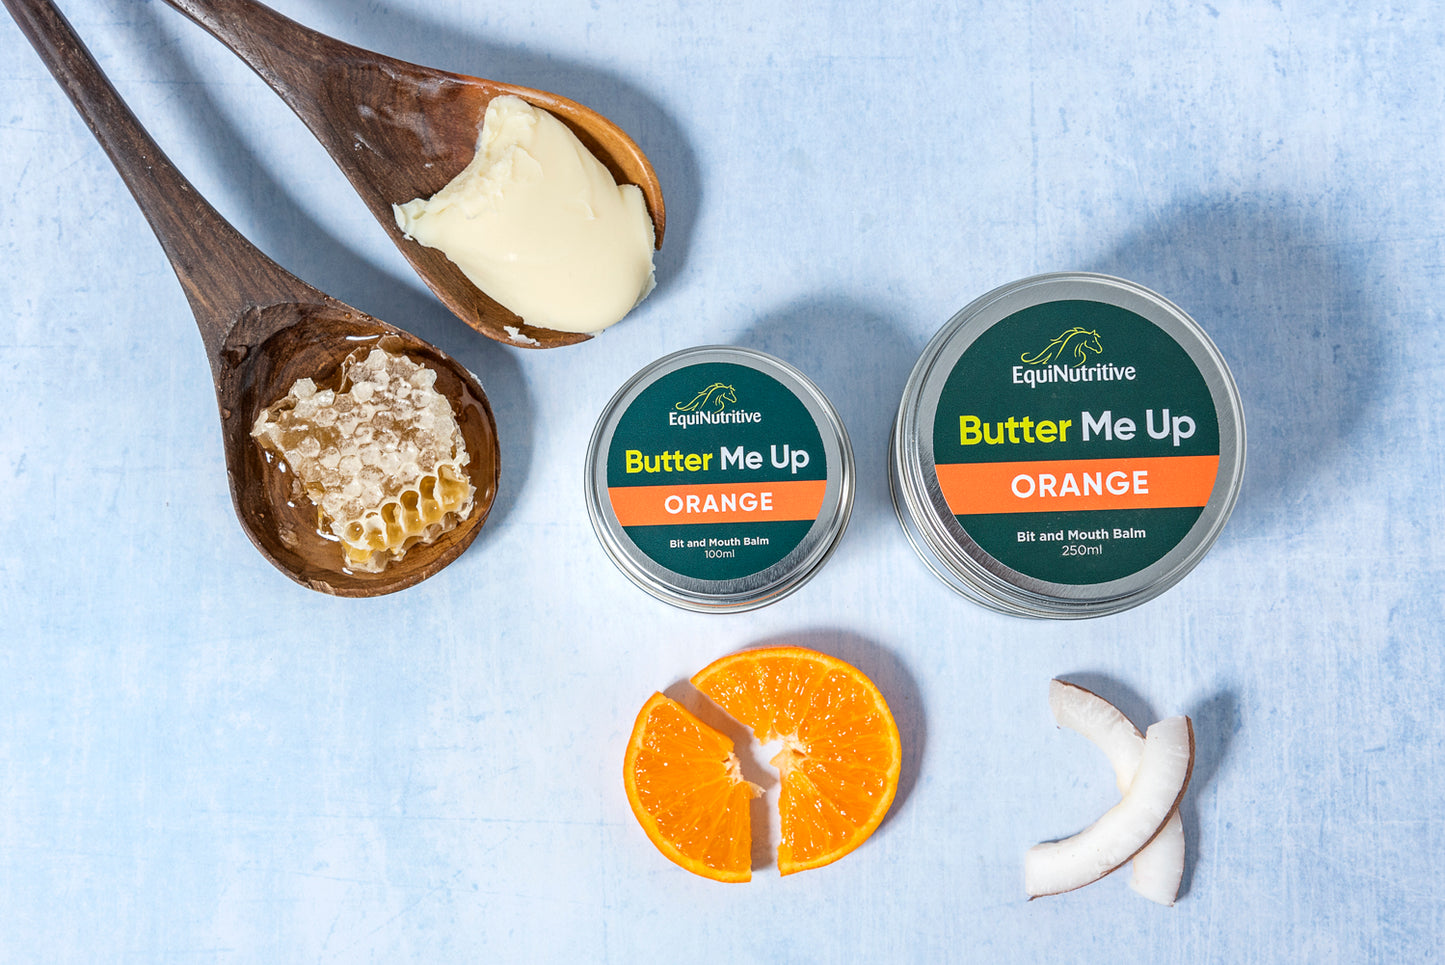 Butter me up - Bit and Mouth Balm